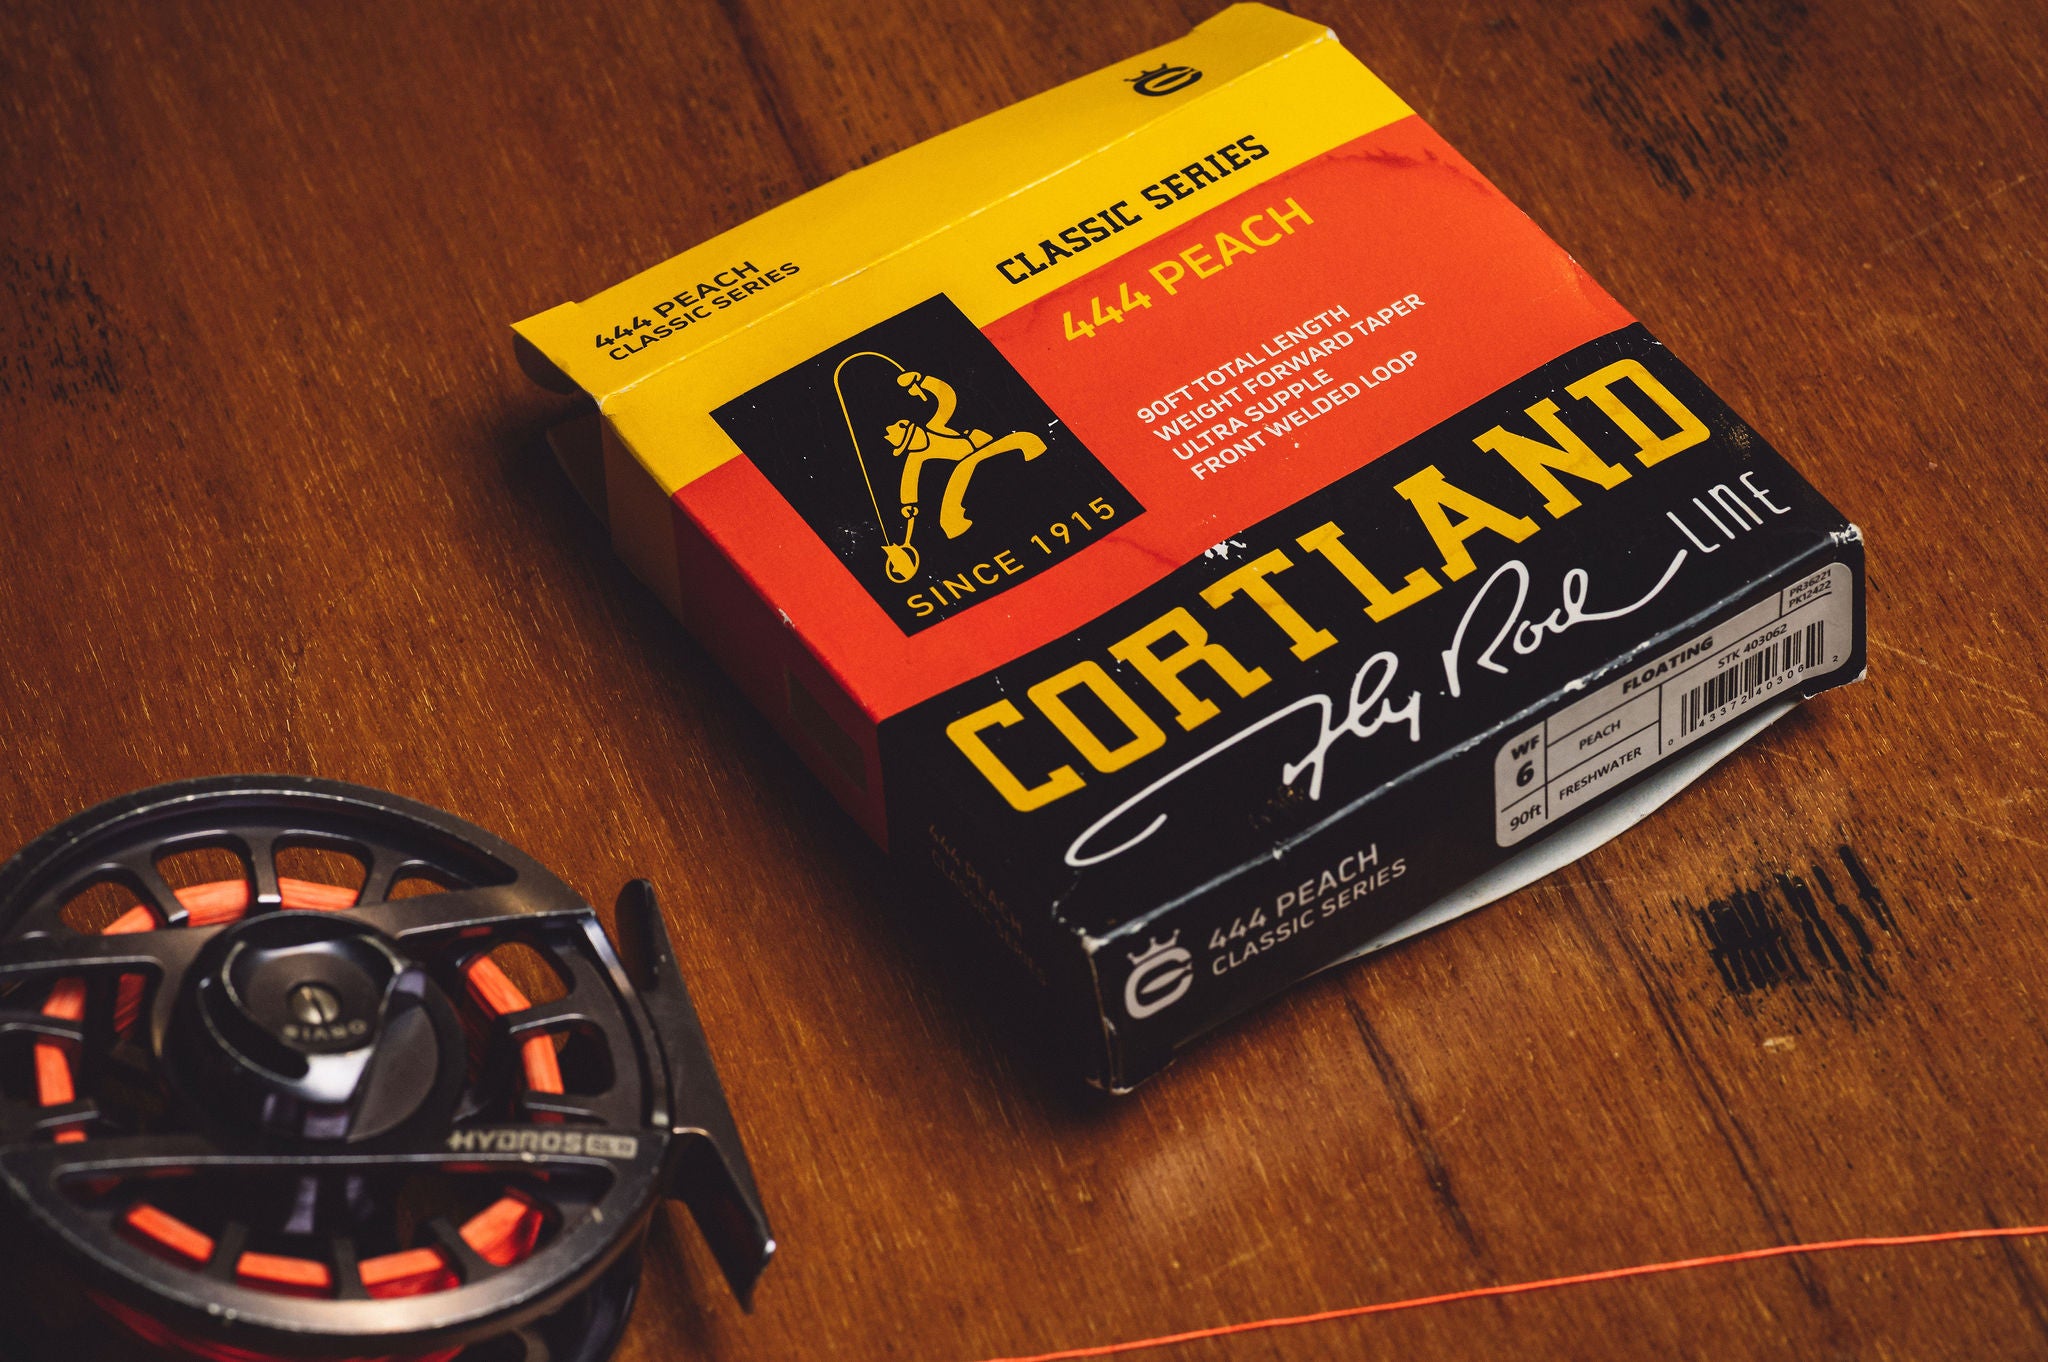 444 Peach - Freshwater Floating Fly Line – Cortland Line Company